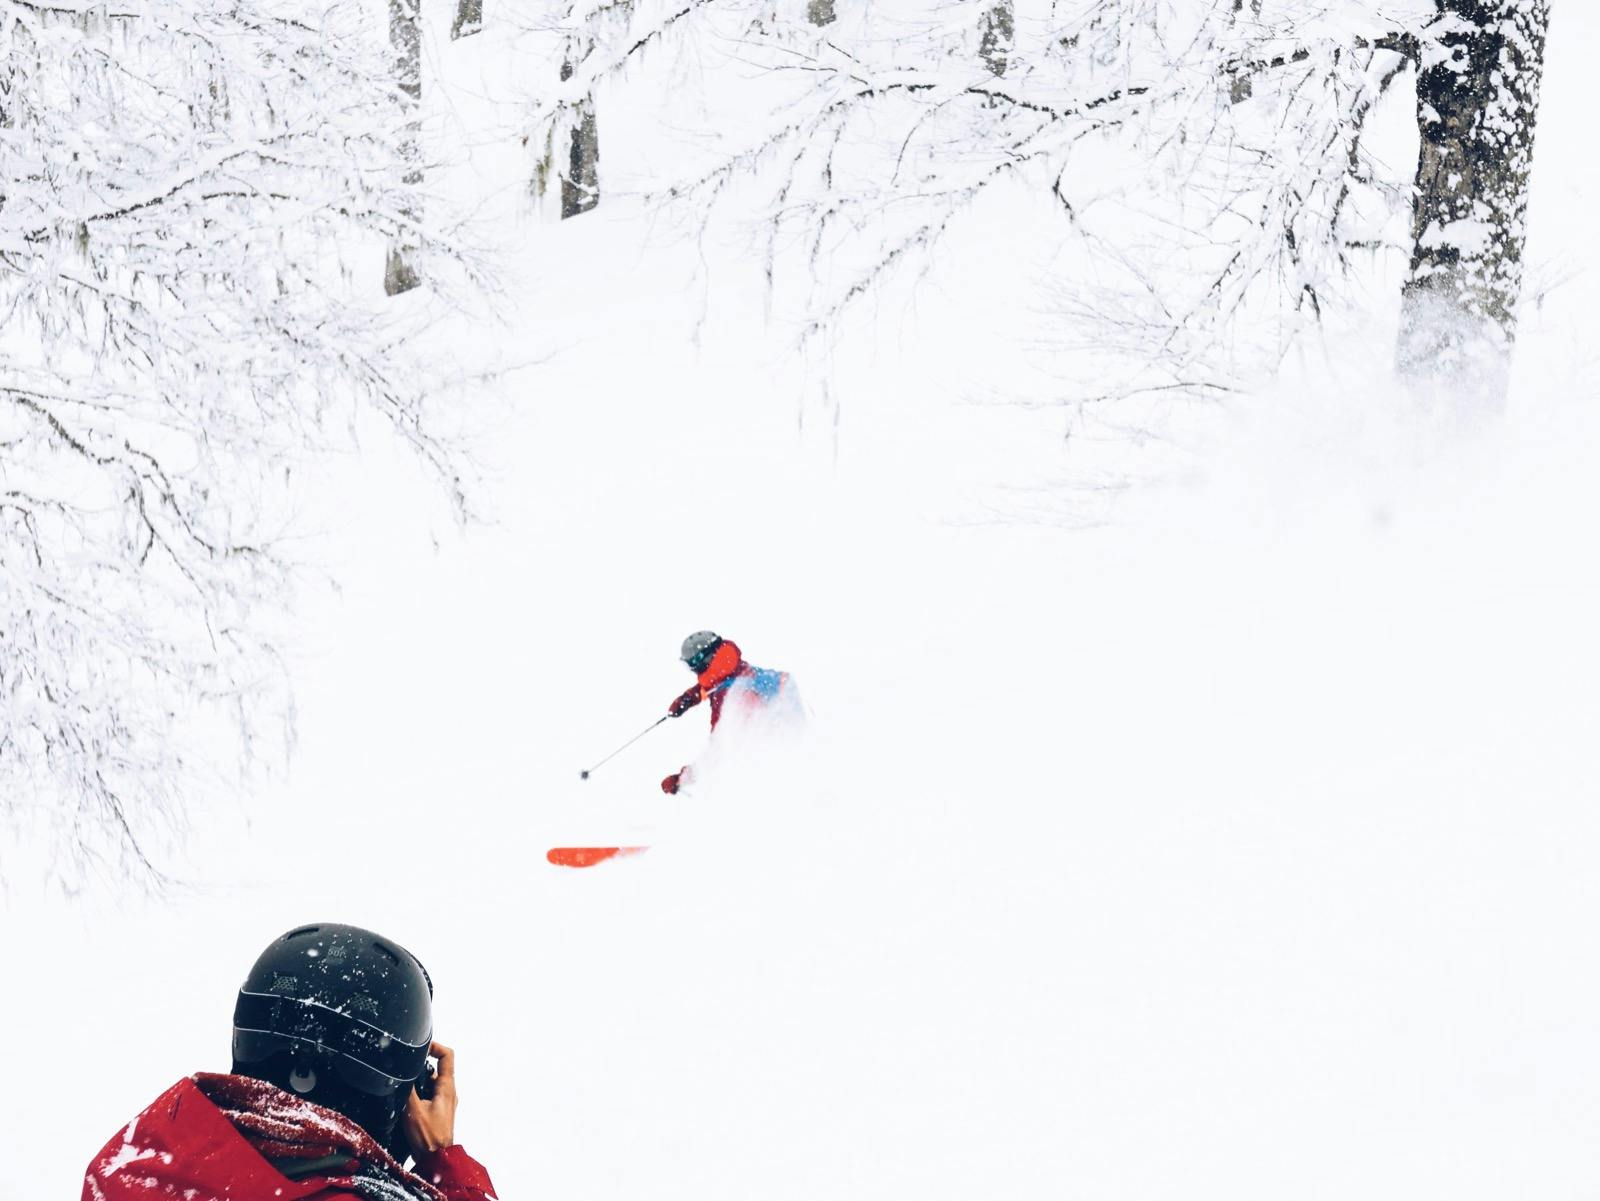 Photographer taking a photo of Skier in the powder snow